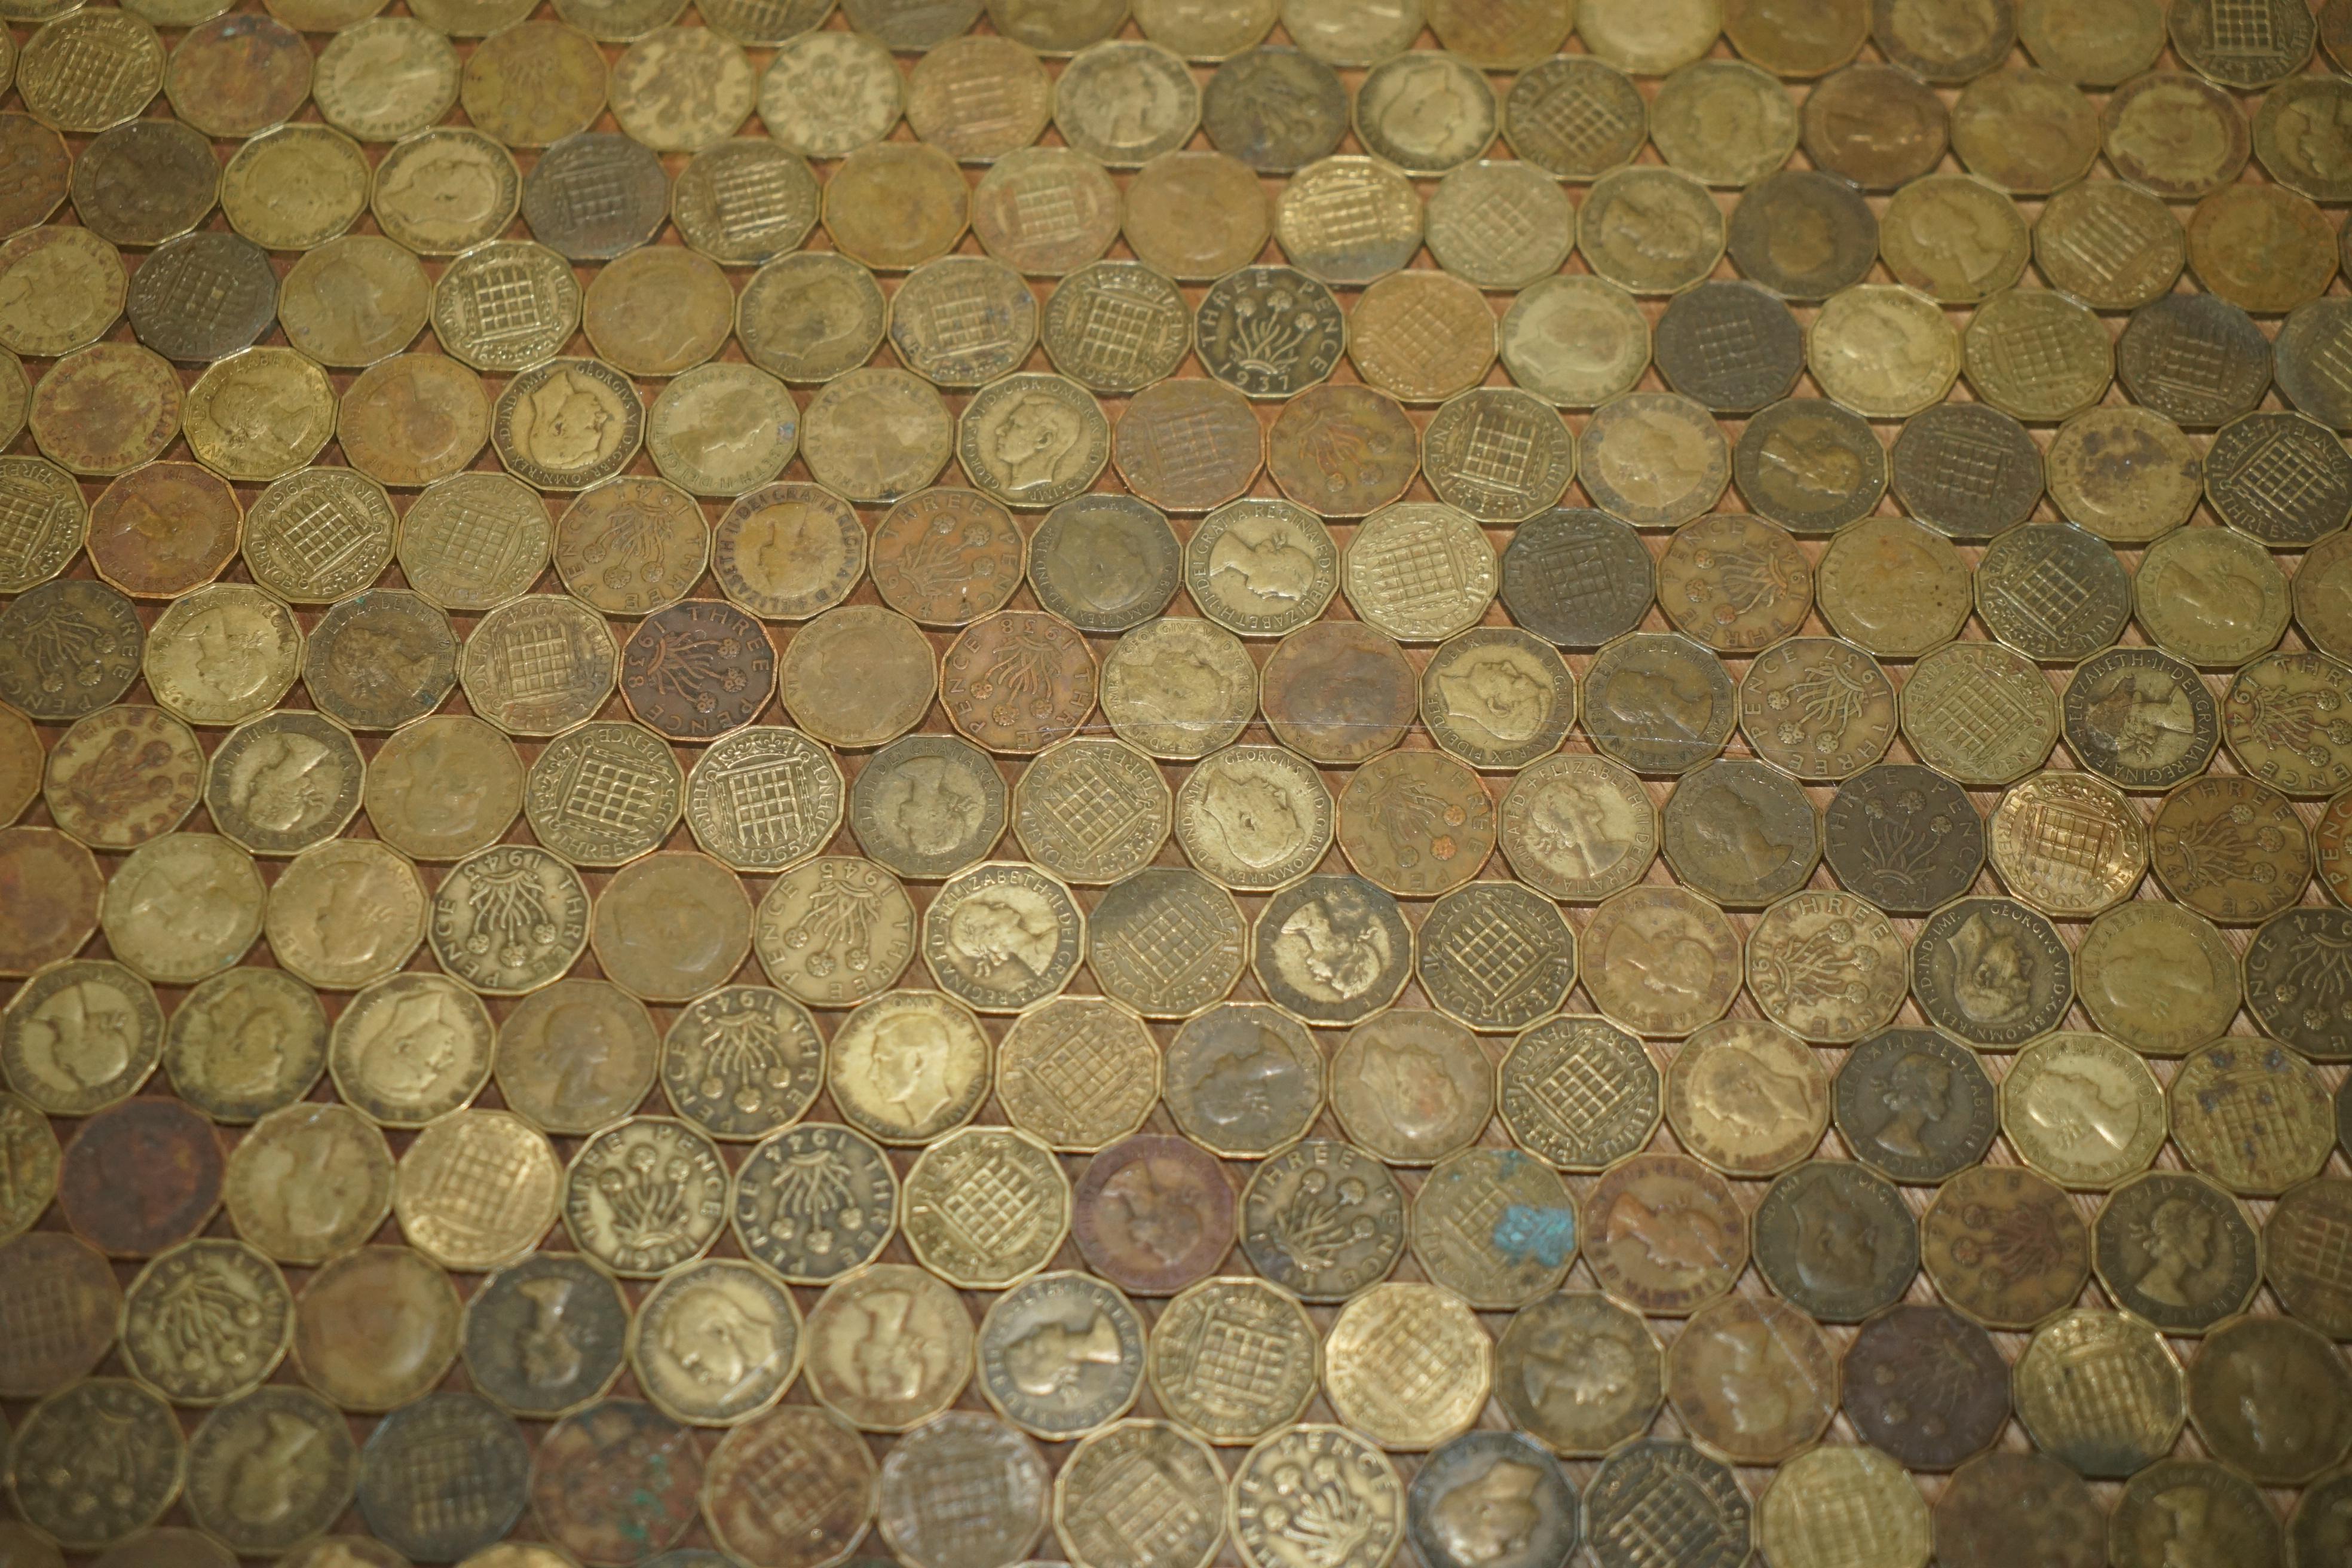 ANTIQUE CIRCA 1920 COFFEE TABLE COVERS IN ENGLISH THREE PENCE COINS FROM 1940er Jahre im Angebot 3